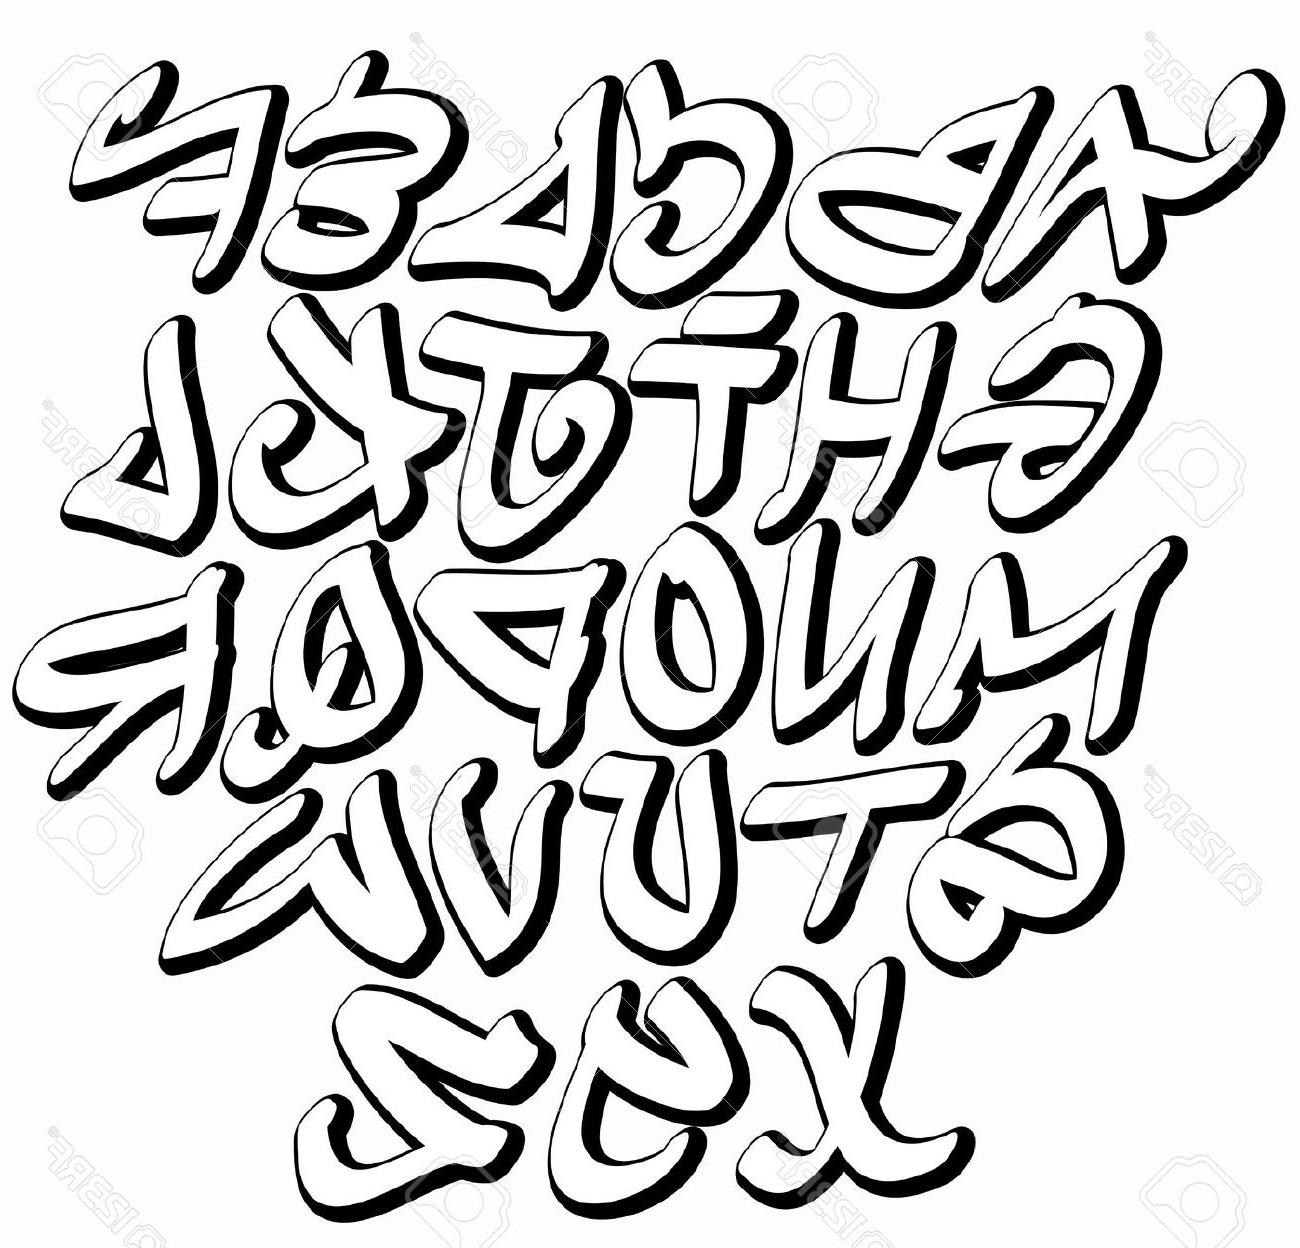 Cool Letters Drawing | Free download on ClipArtMag